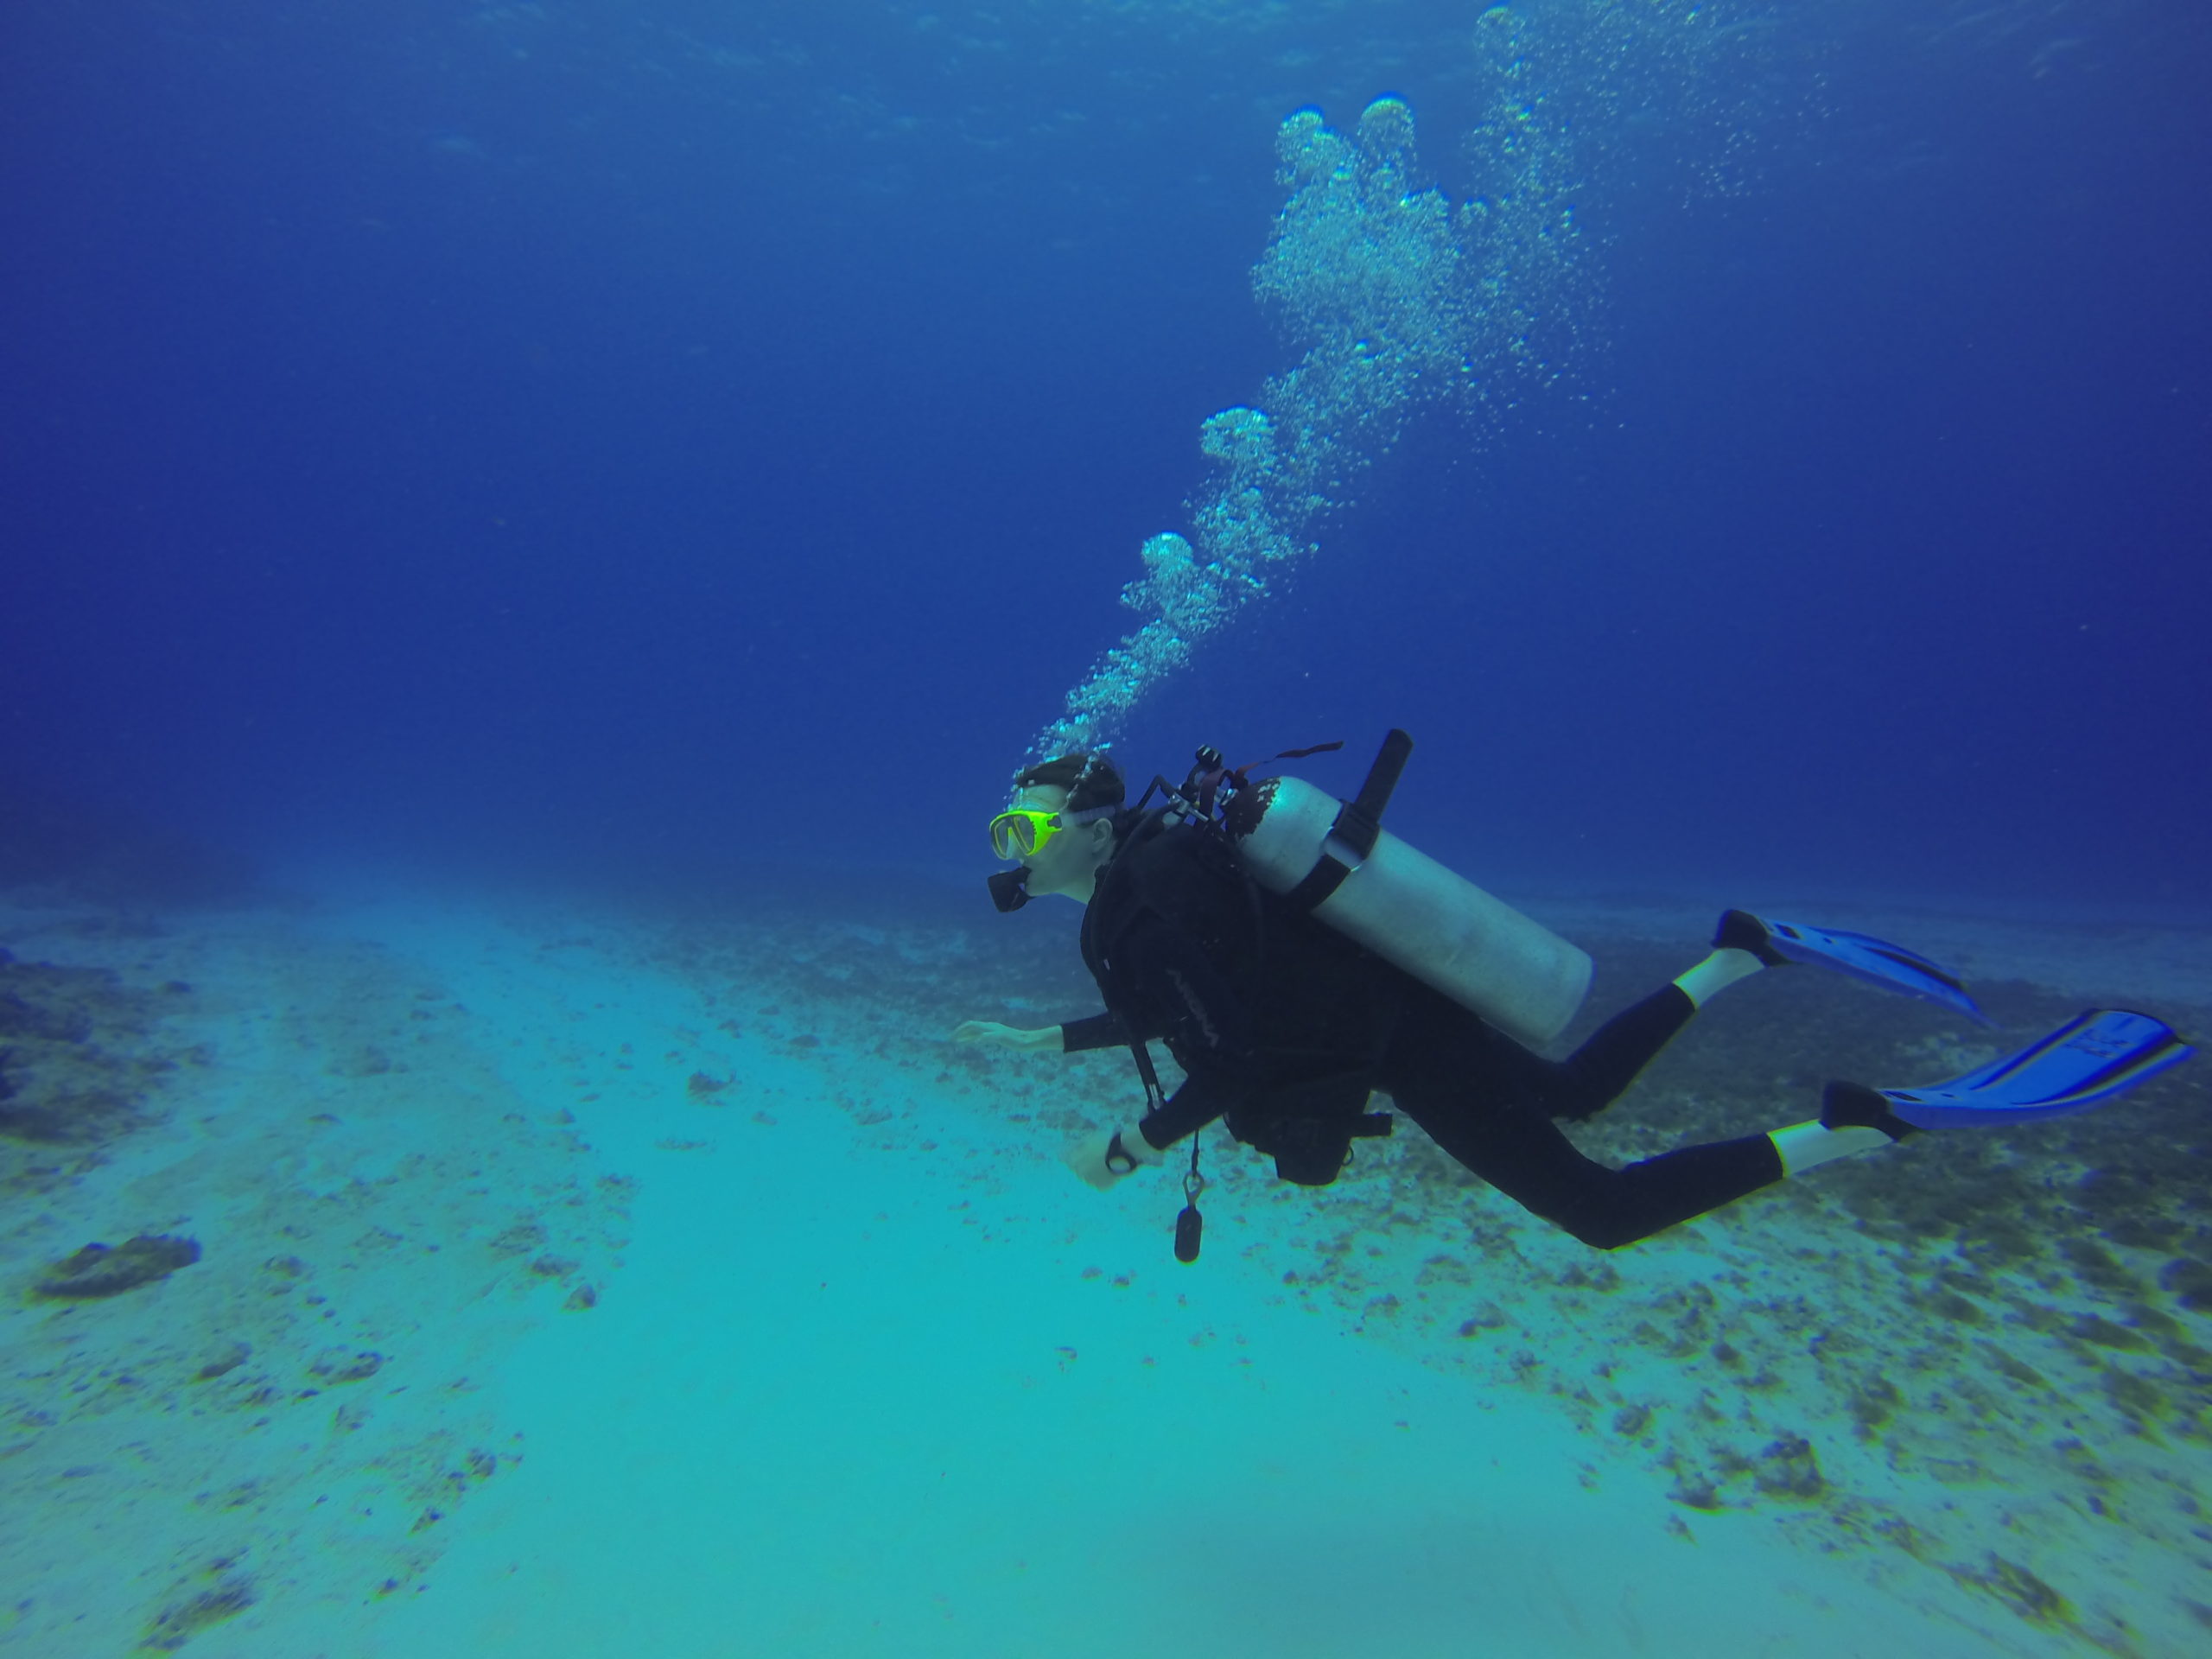 Me (Kate) diving in Cozumel. Photo by CORAL staff